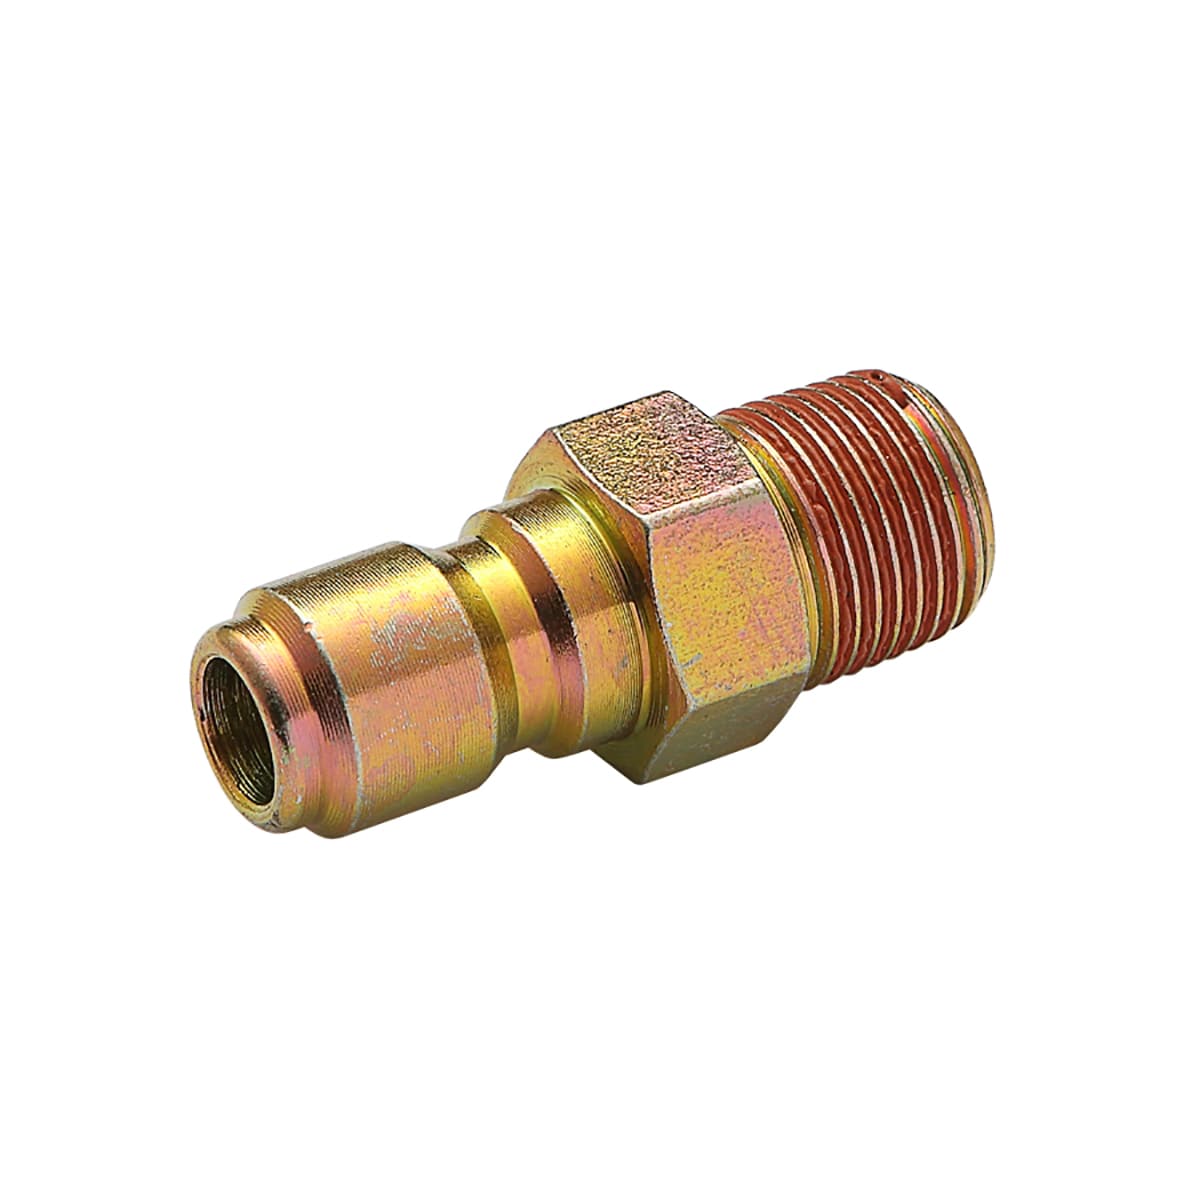 Pressure Washer Fittings Brass 15mm Hole to 3/8BSPT Female Socket Quick Coupler 